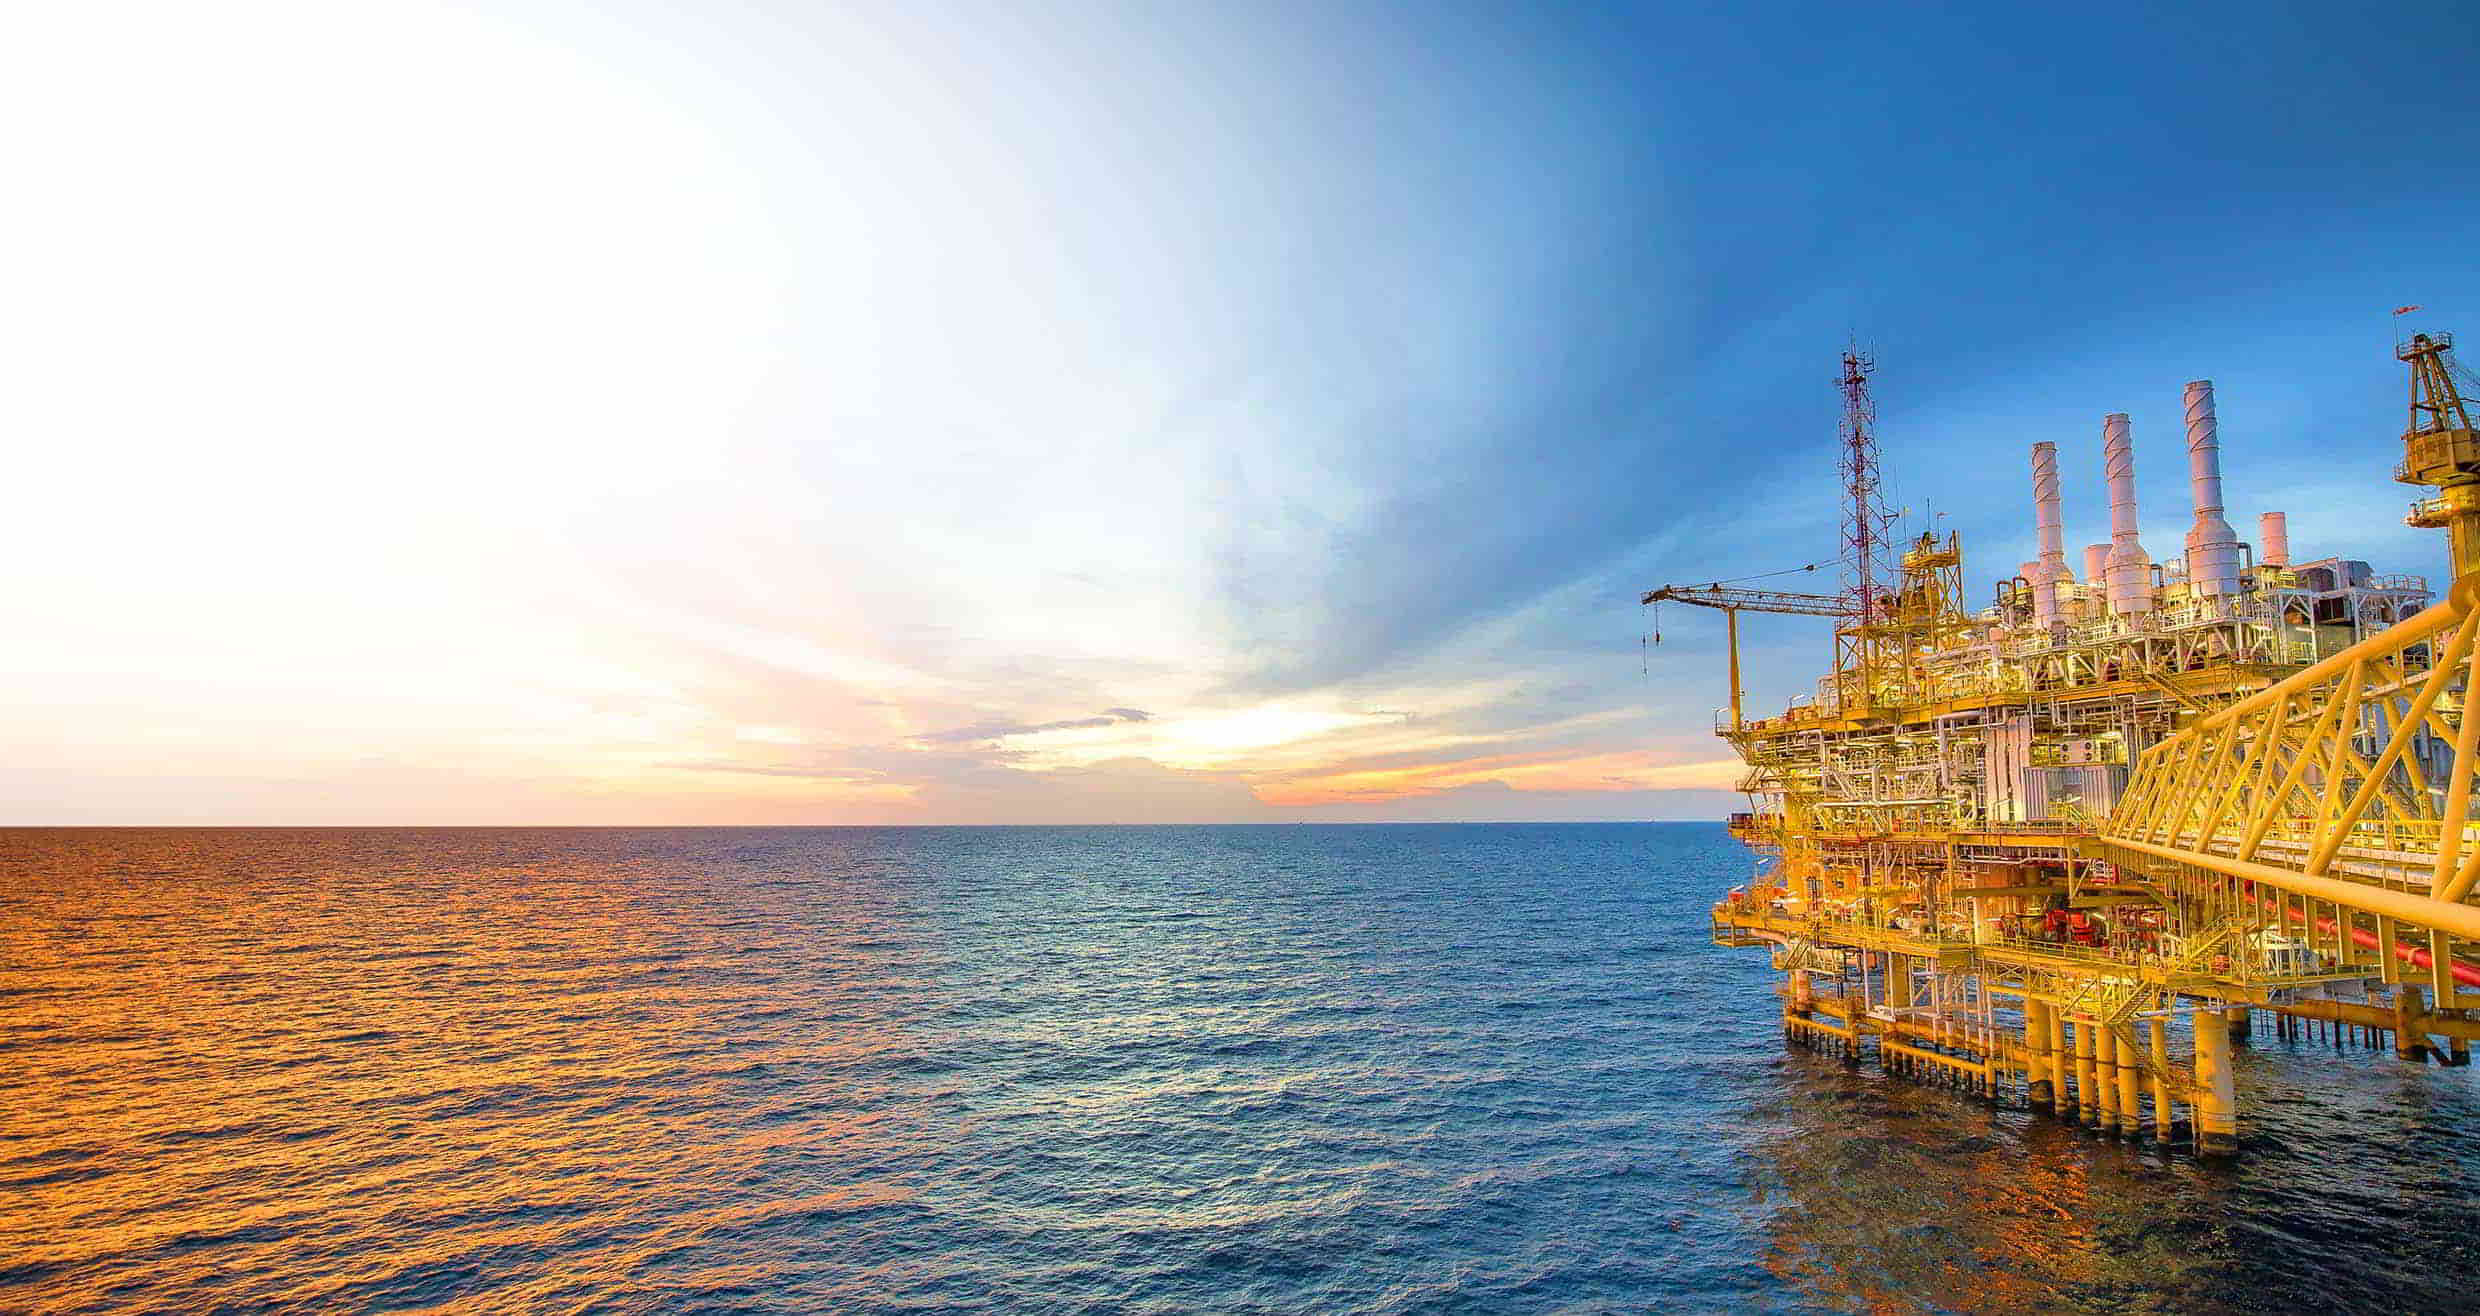 With final approval in place, Eco boosts its stake in South African offshore block